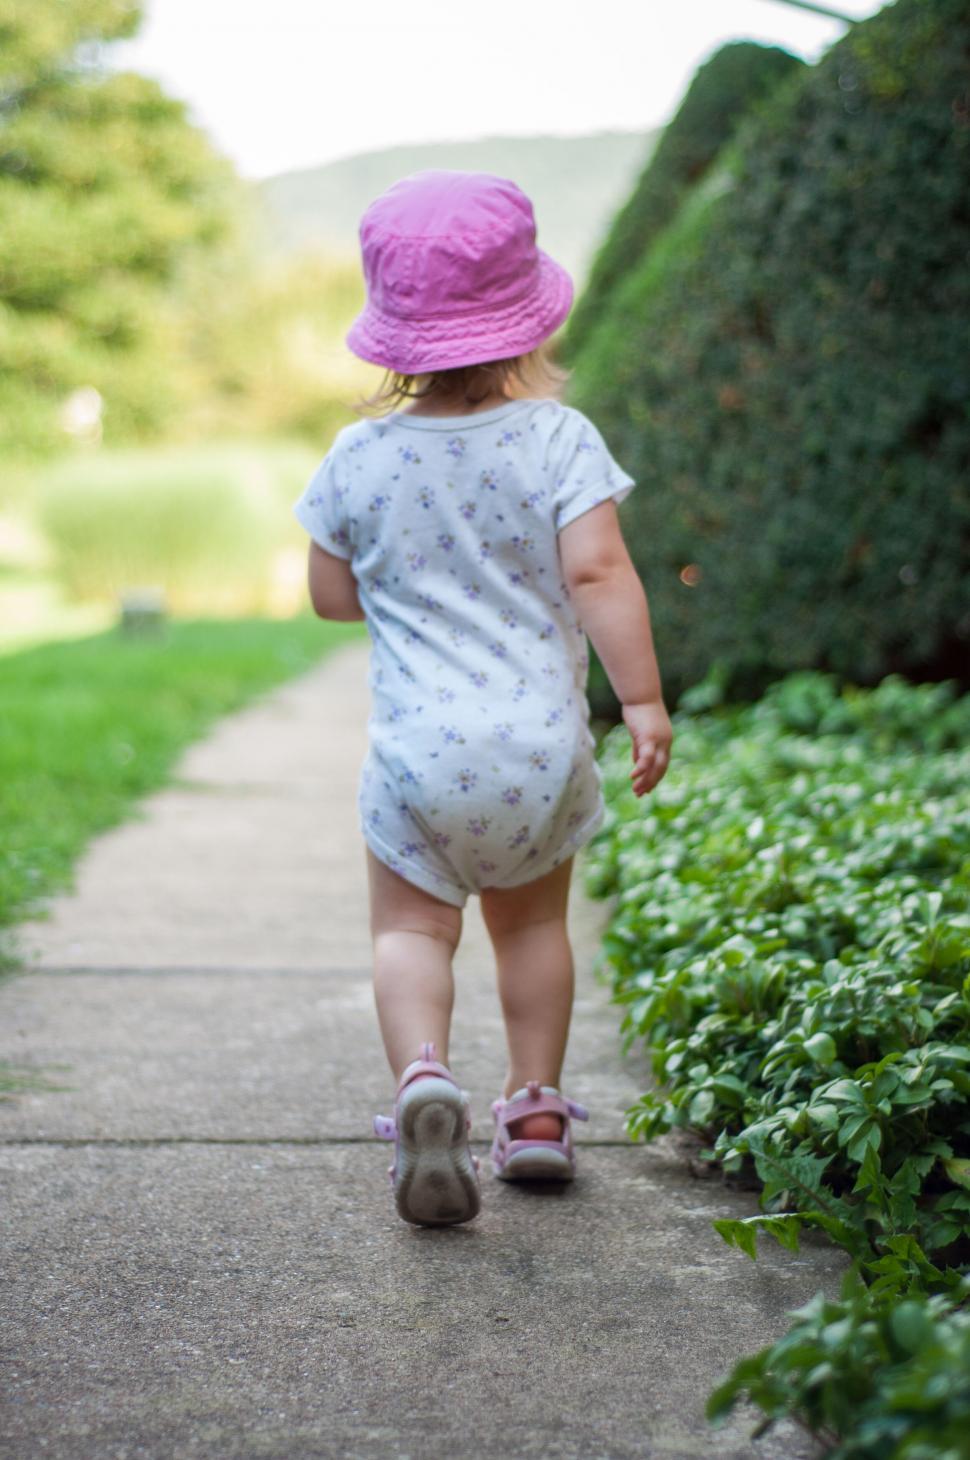 Free Image of Toddler walking on a paved path wearing a hat 